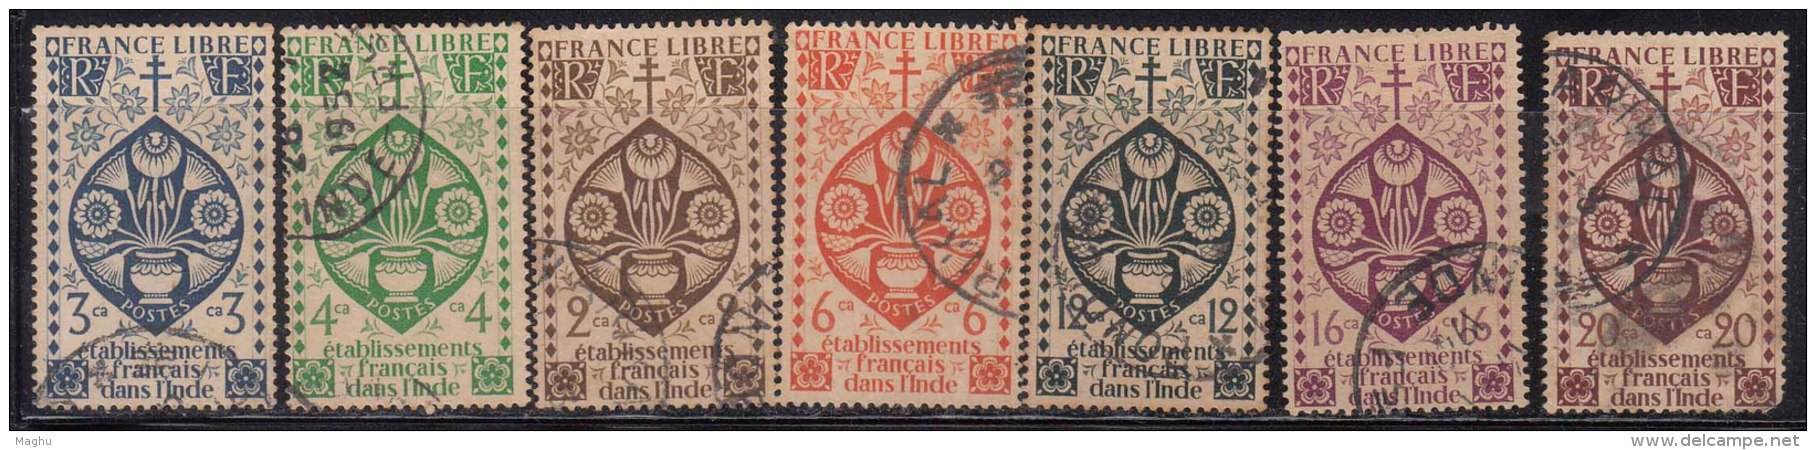 France, French India 1942, Used, 7 Values, Lotus, Flower, Plant, Christianity  Holy Cross - Used Stamps